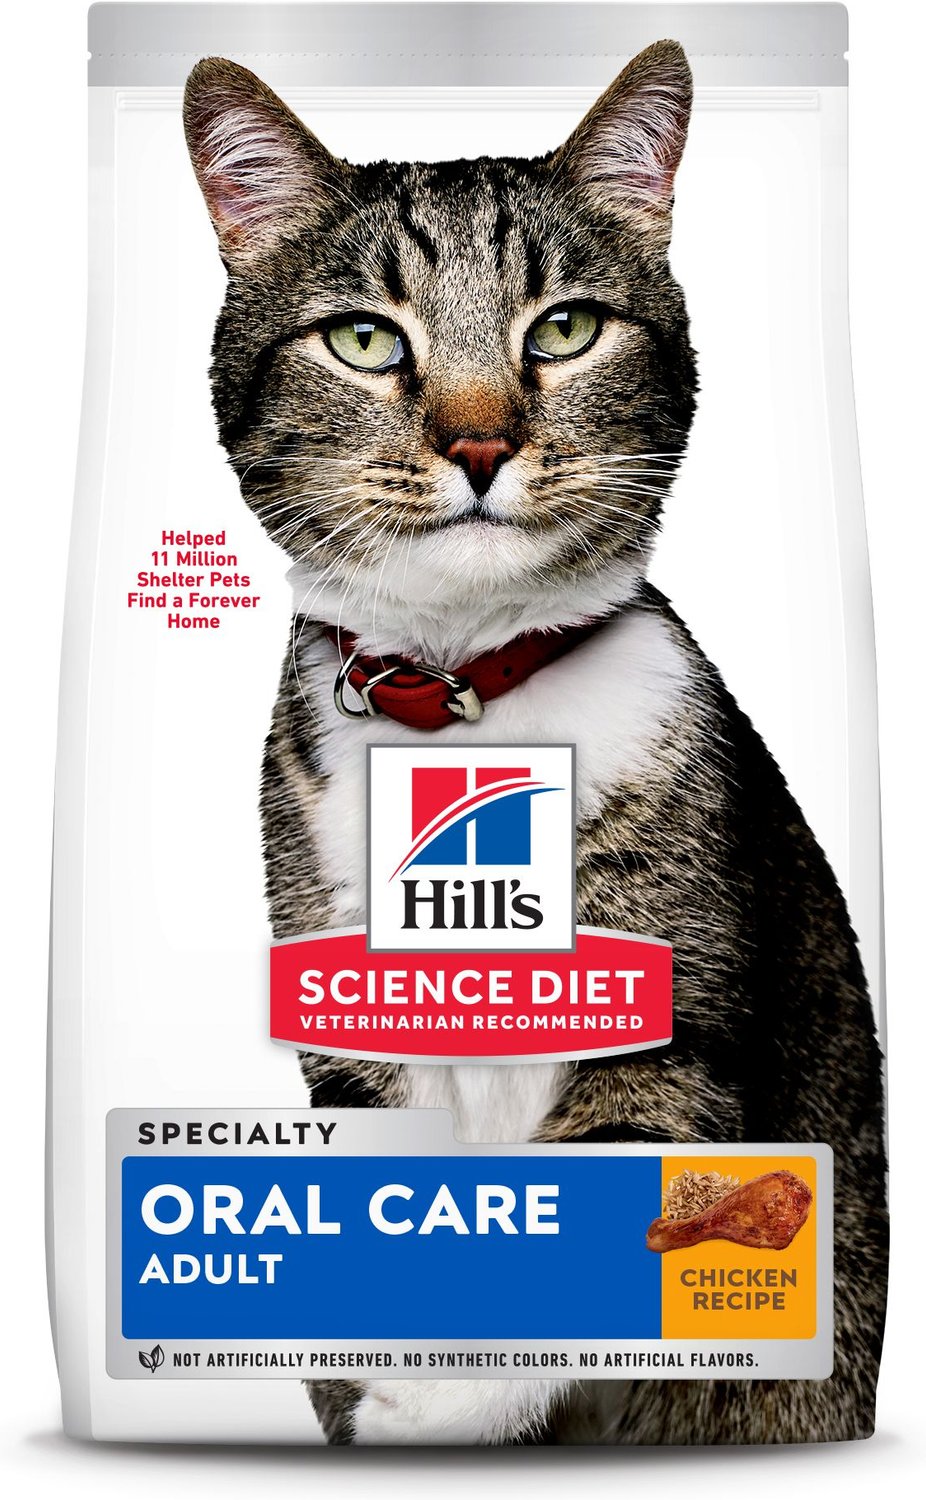 hill's science diet oral care cat food